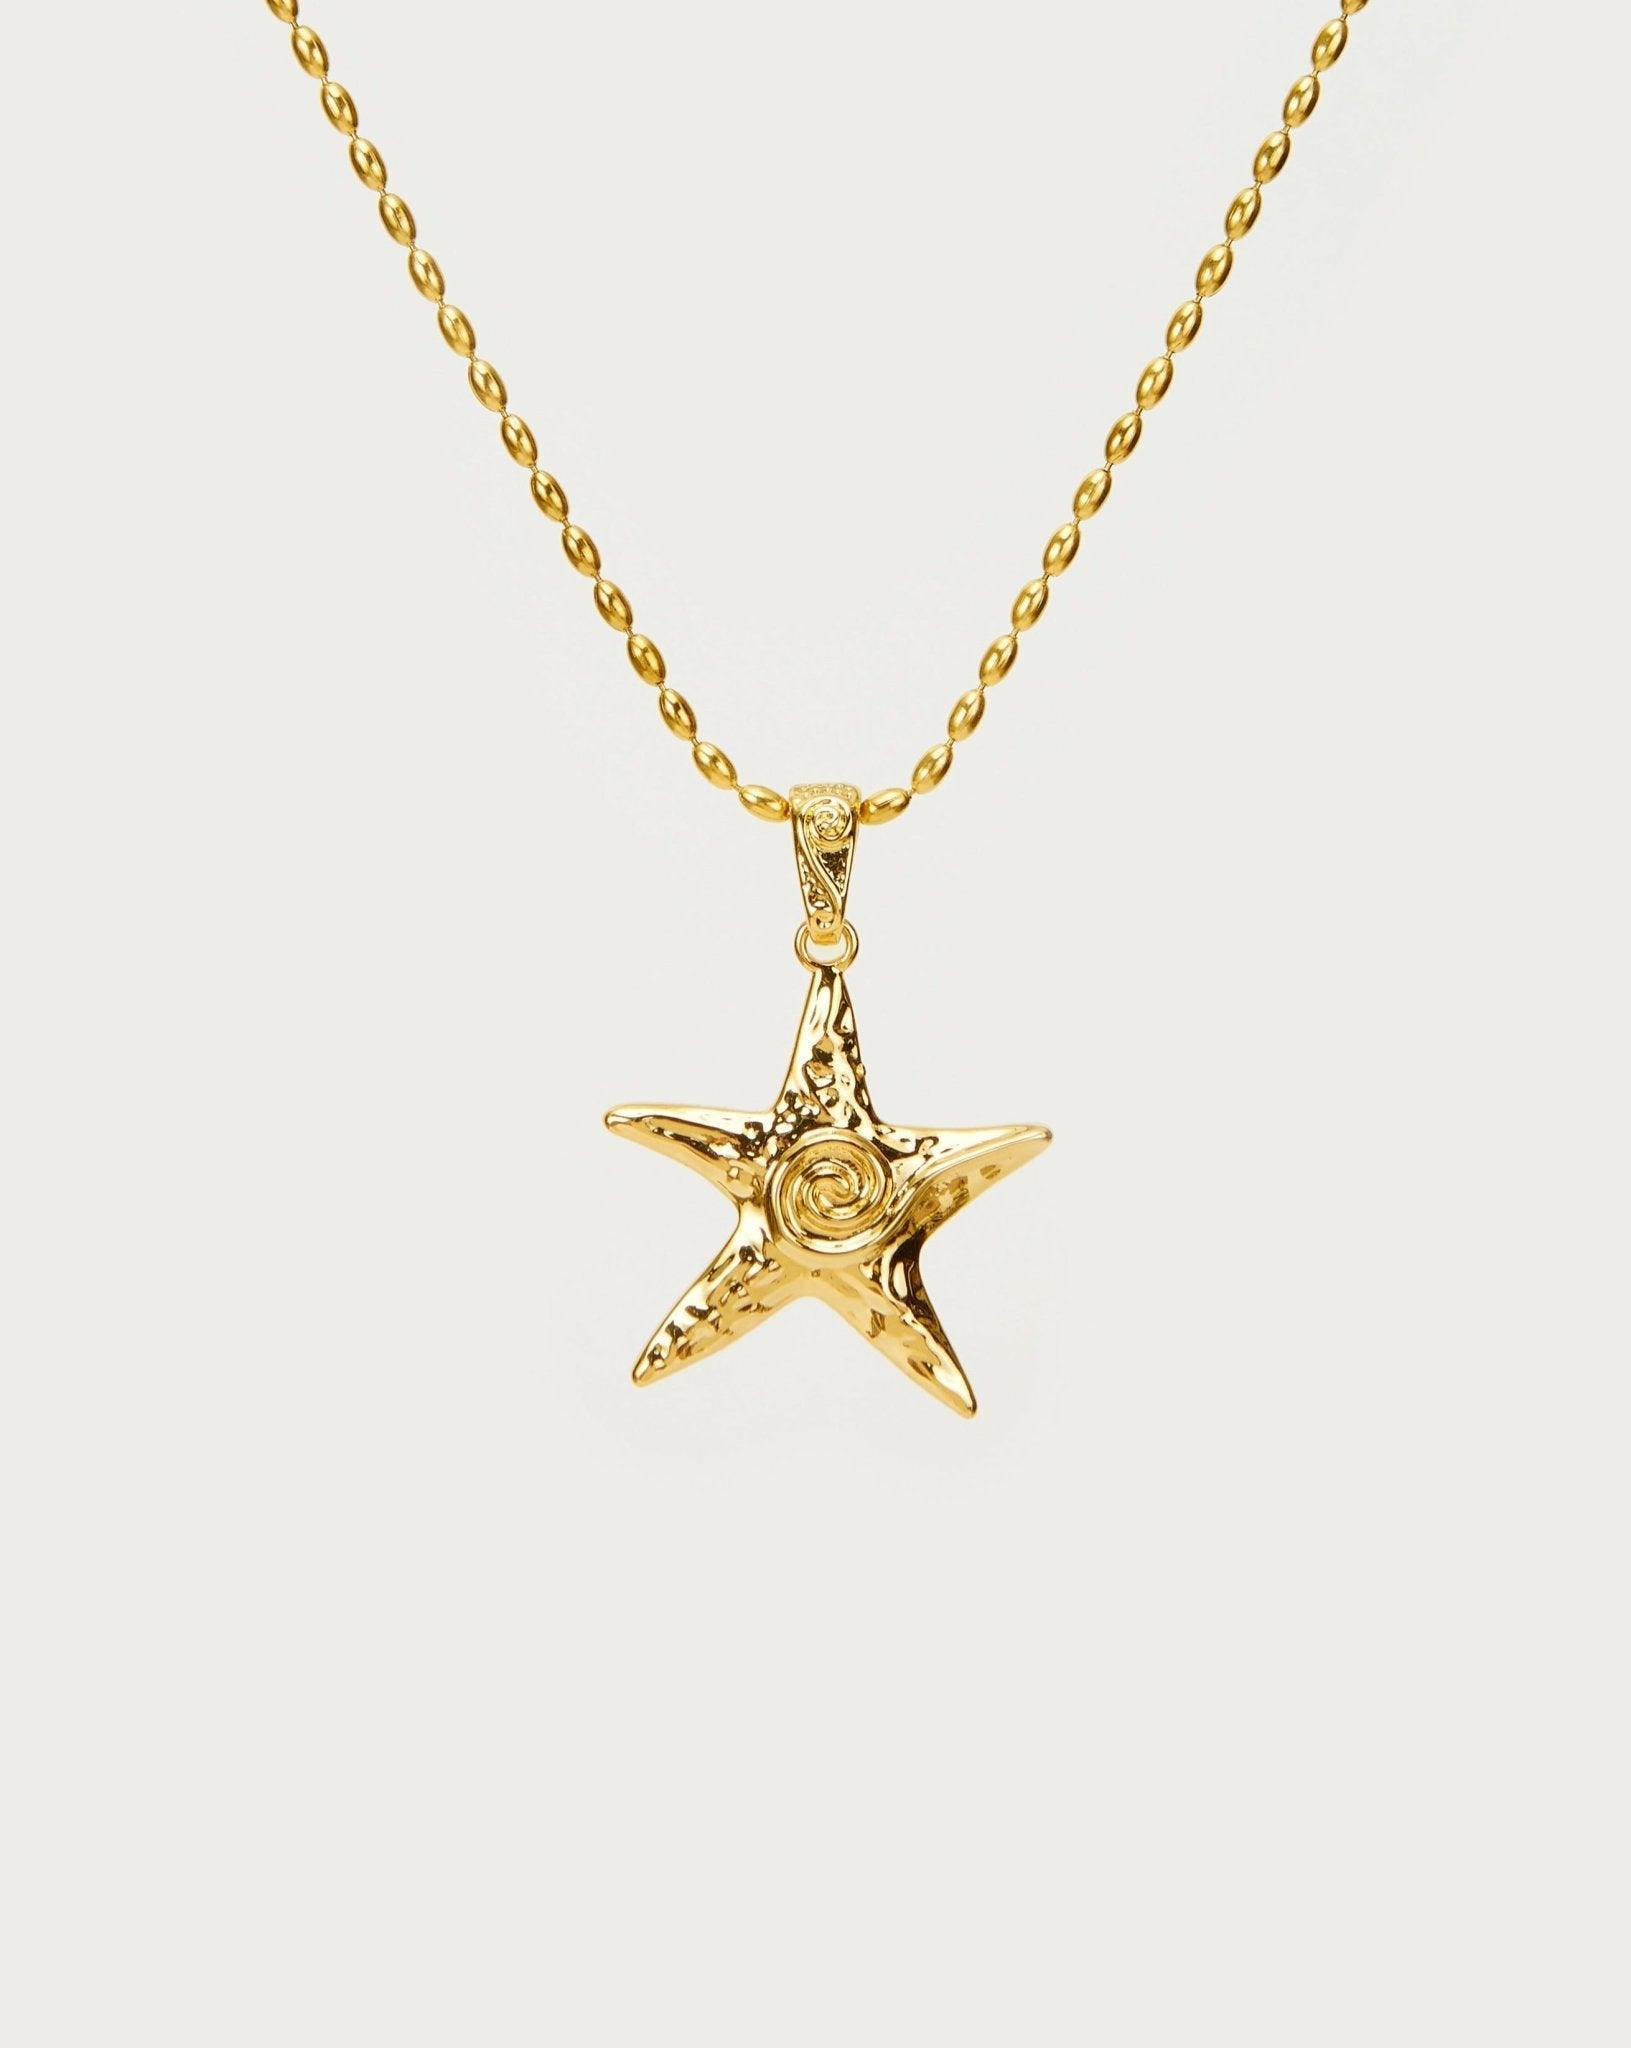 Silver Starfish Necklace - En Route Jewelry